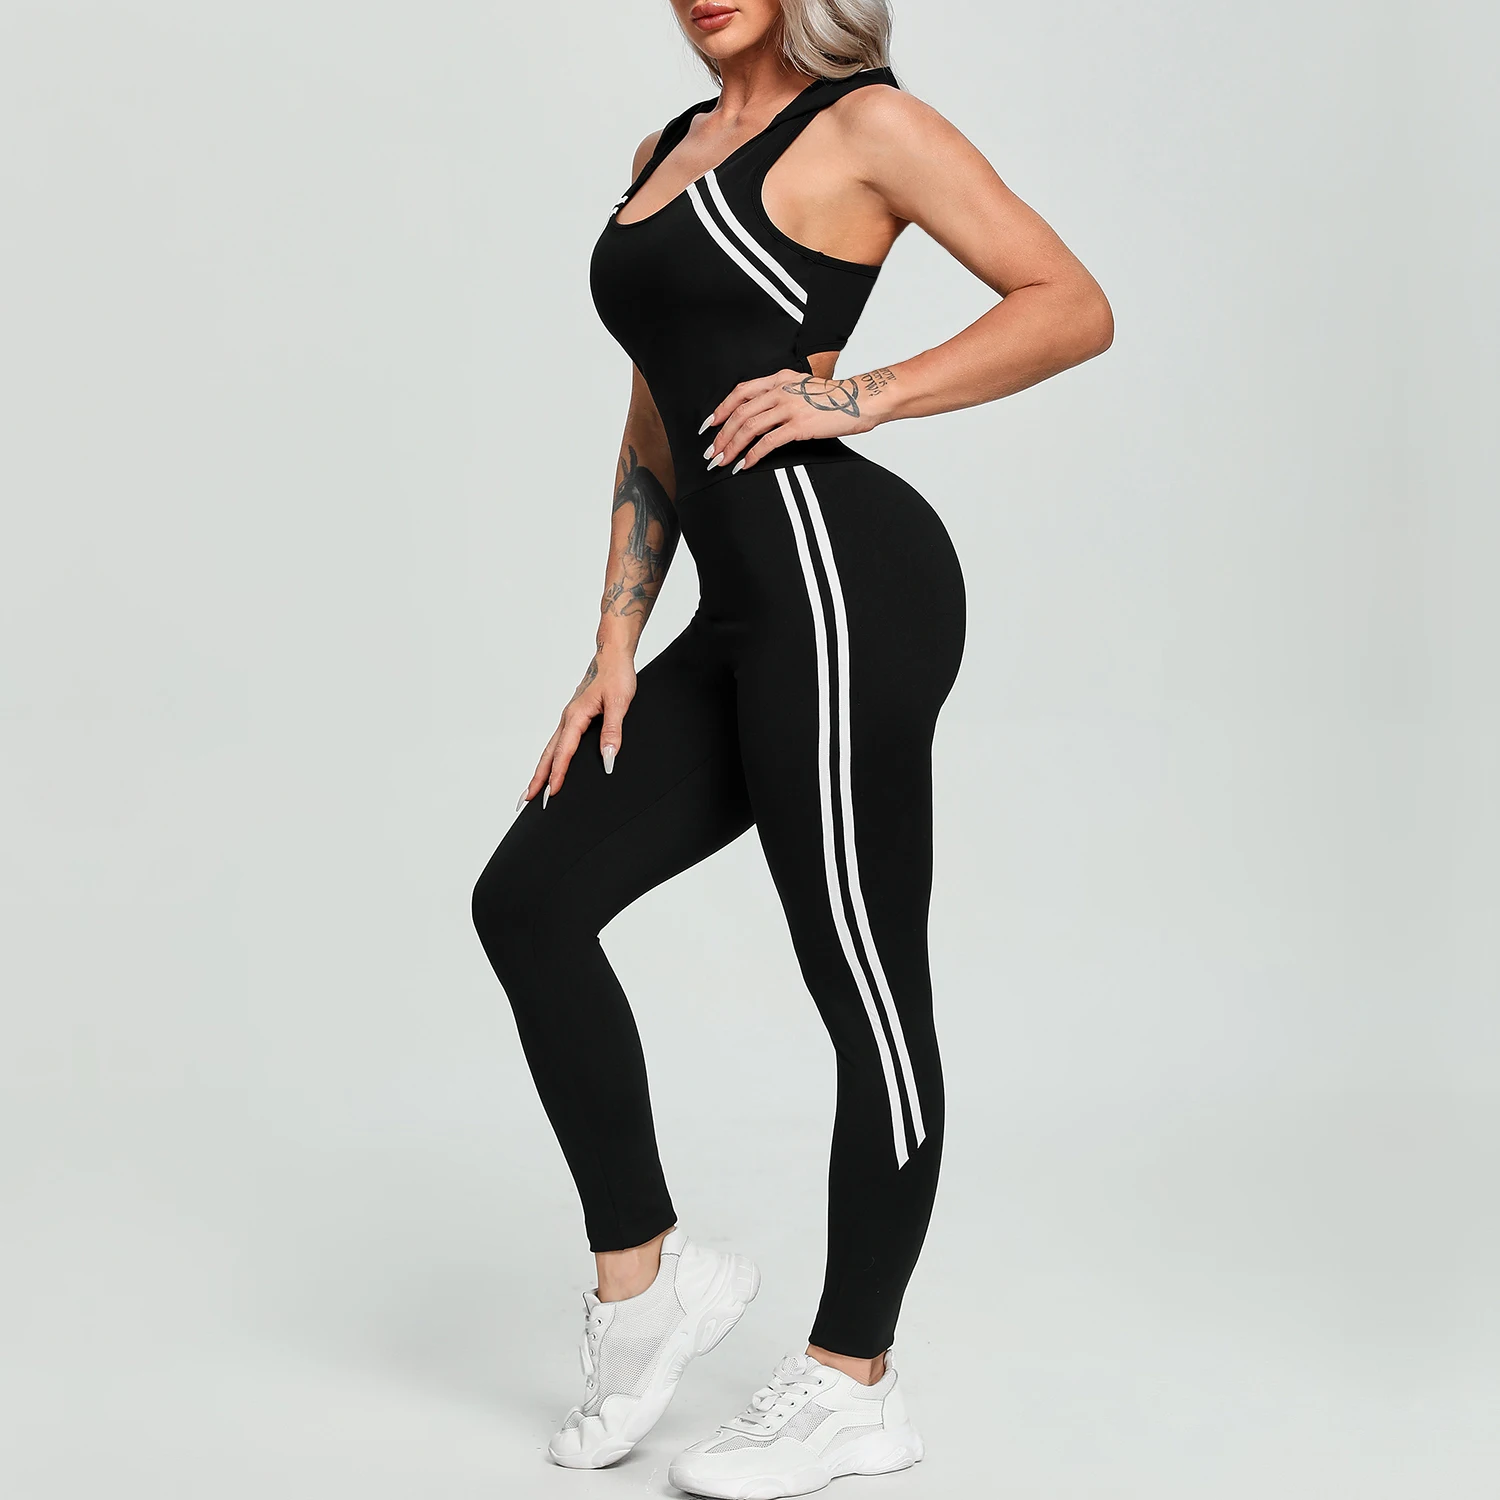 Women's Sport Striped Yoga Gym Athletic Rompers Suit Fitness Workout Jumpsuit Bodysuits Running Fitness Leggings Casual Pants 4